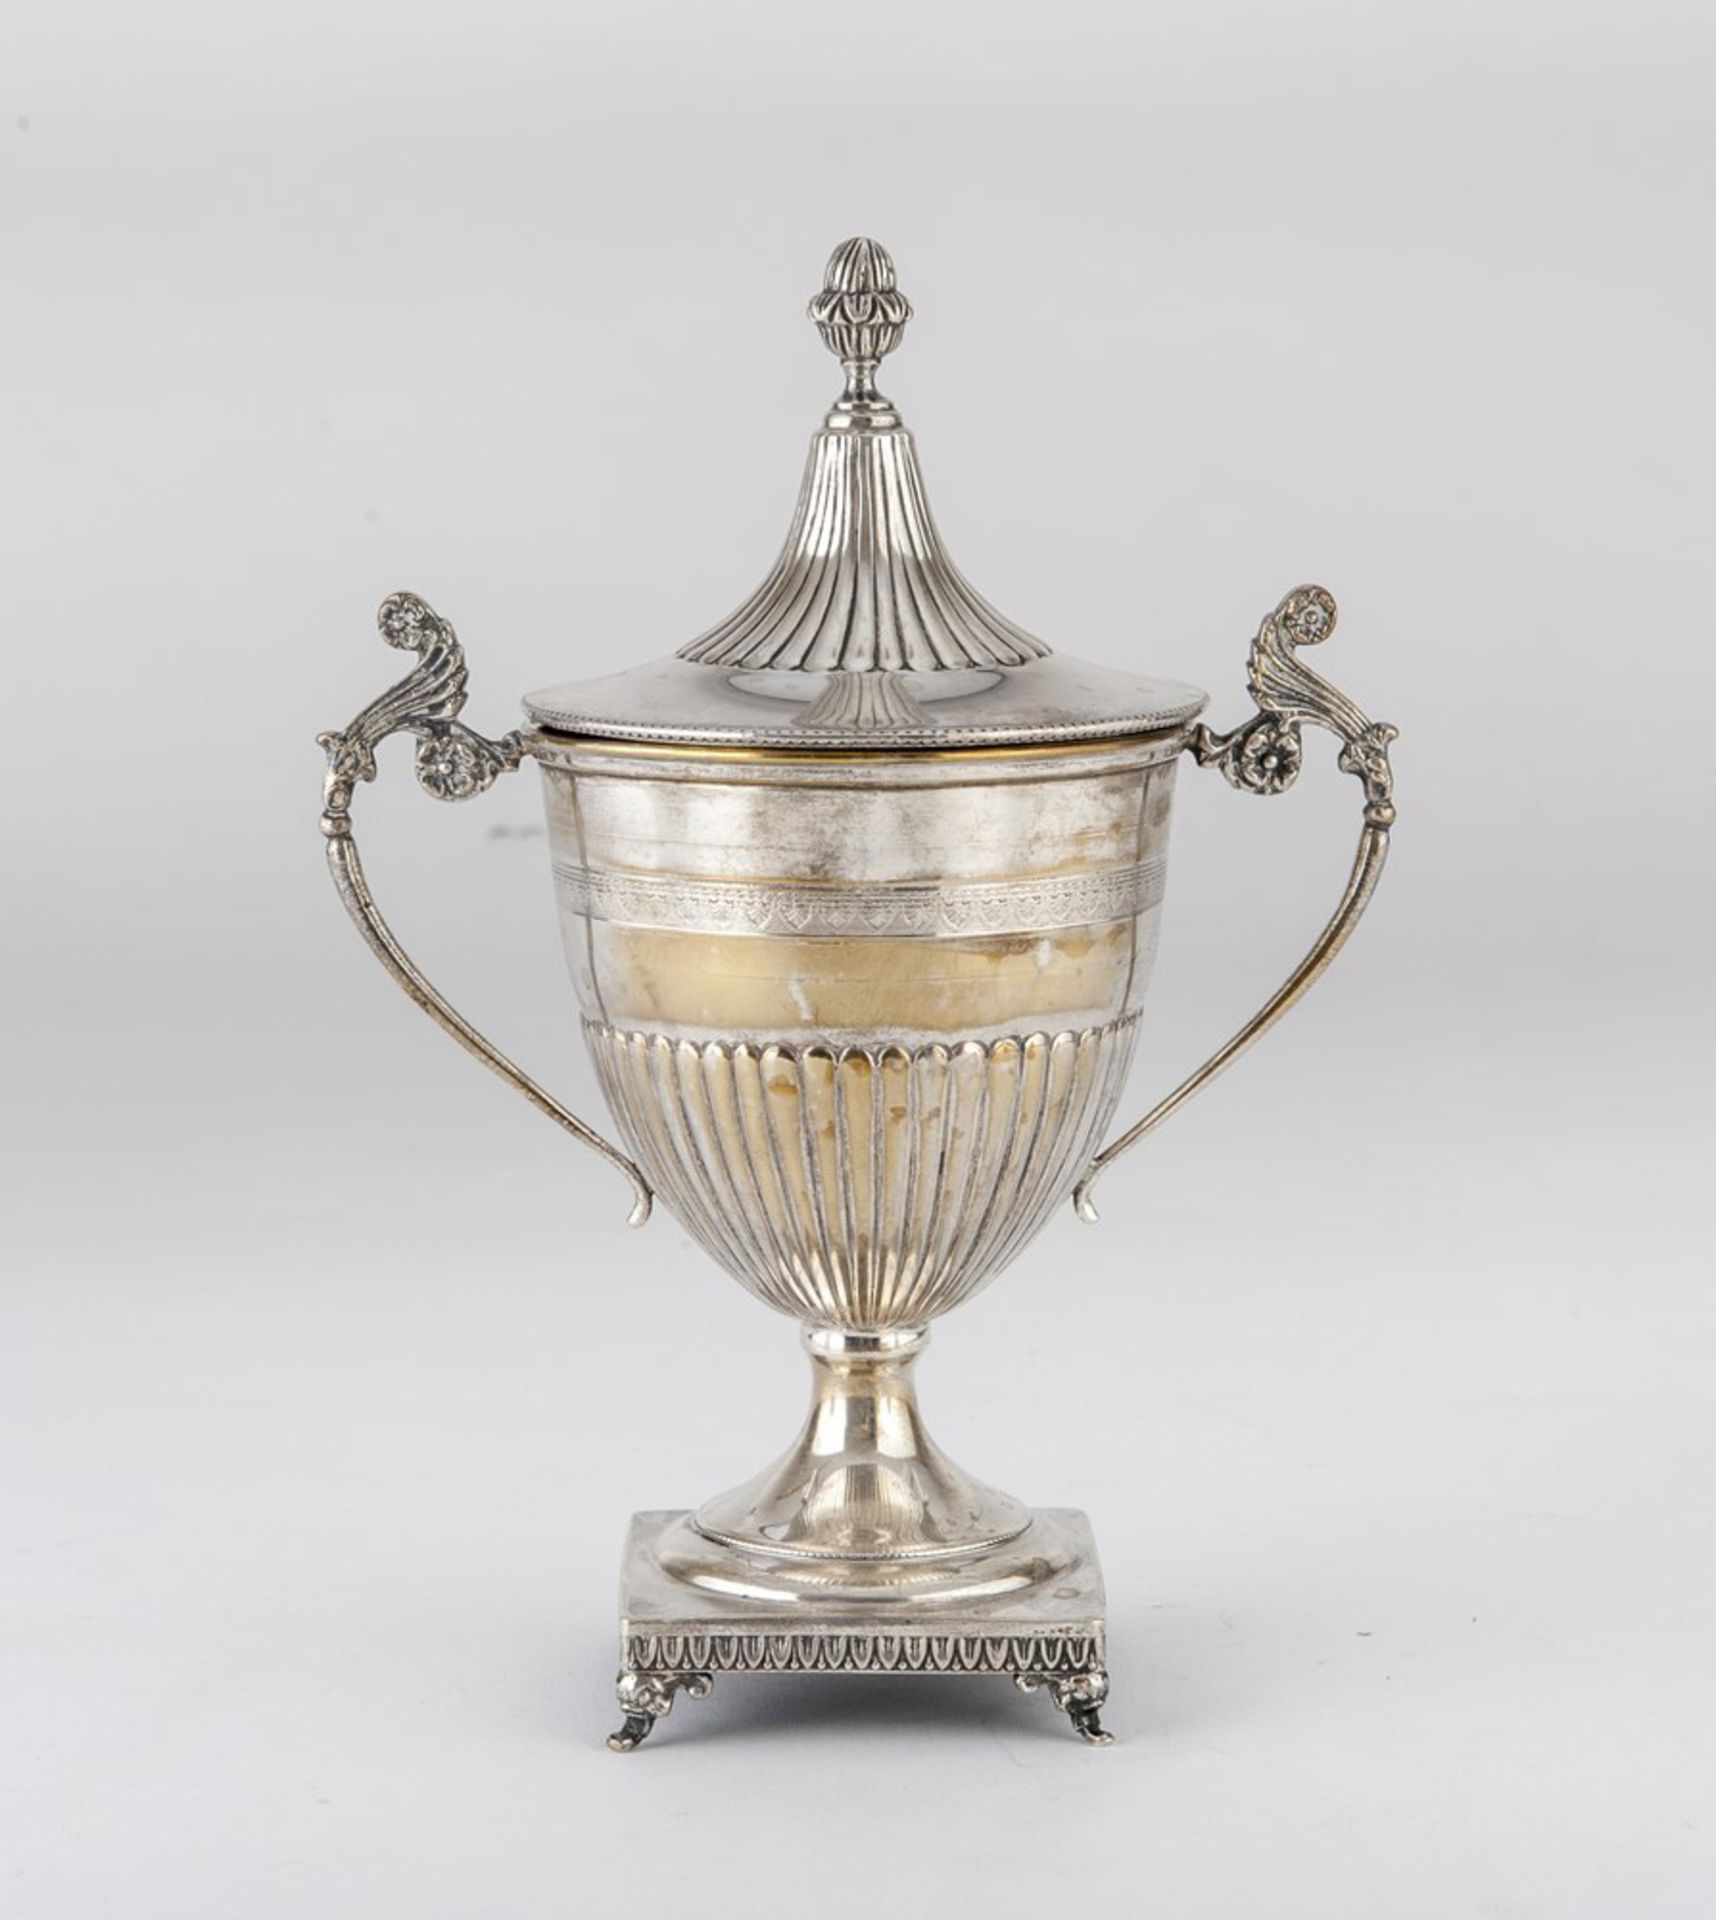 SILVER SUGAR BOWL, PUNCH KINGDOM OF ITALY, FLORENCE 1934/1944 Measures cm. 26 x 18 x 12, weight